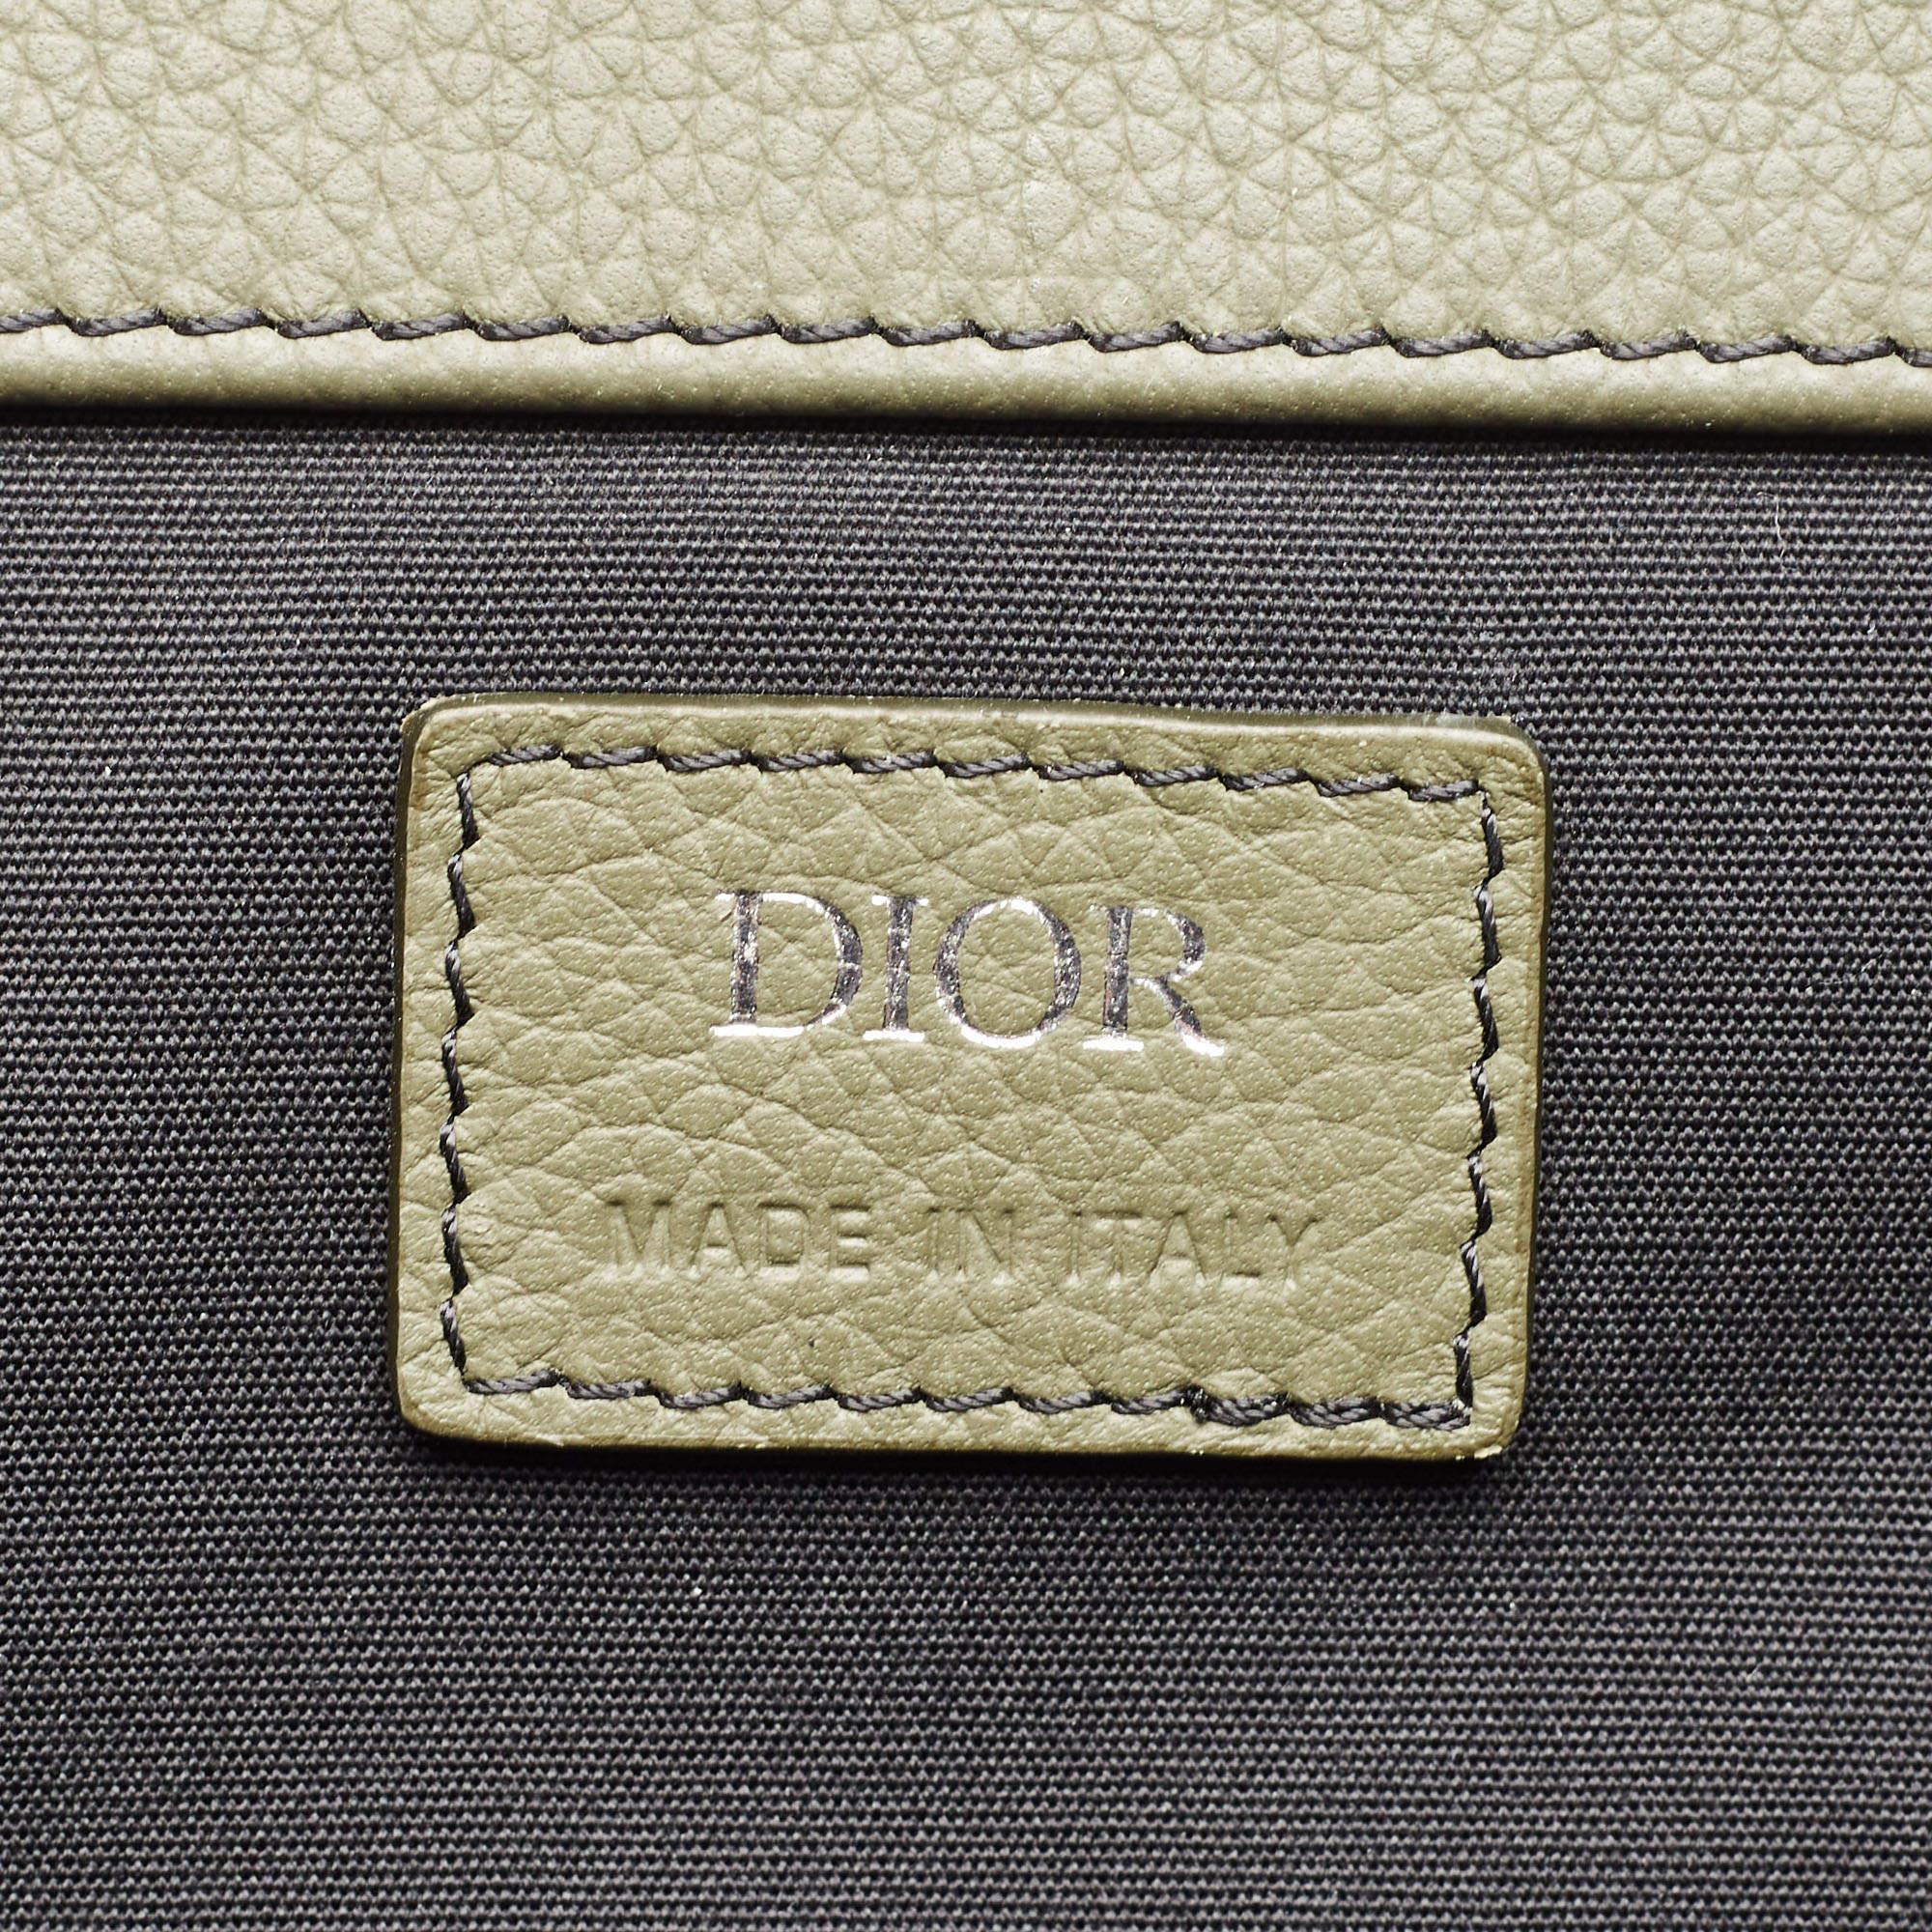 Dior Fatigue Green Leather Saddle Backpack 1